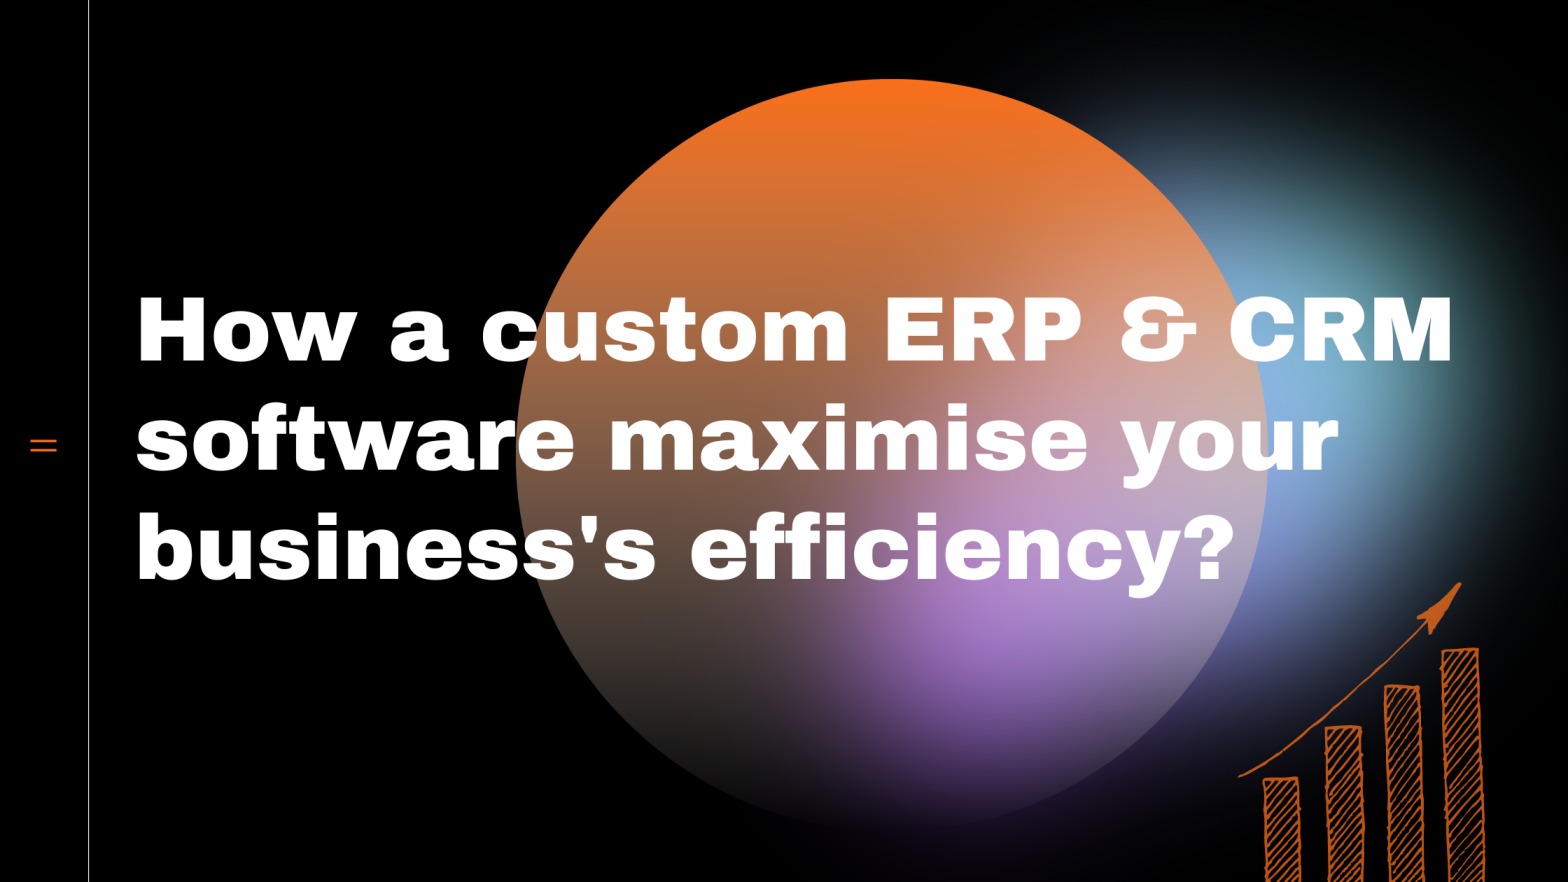 How a custom ERP & CRM software maximise your business's efficiency